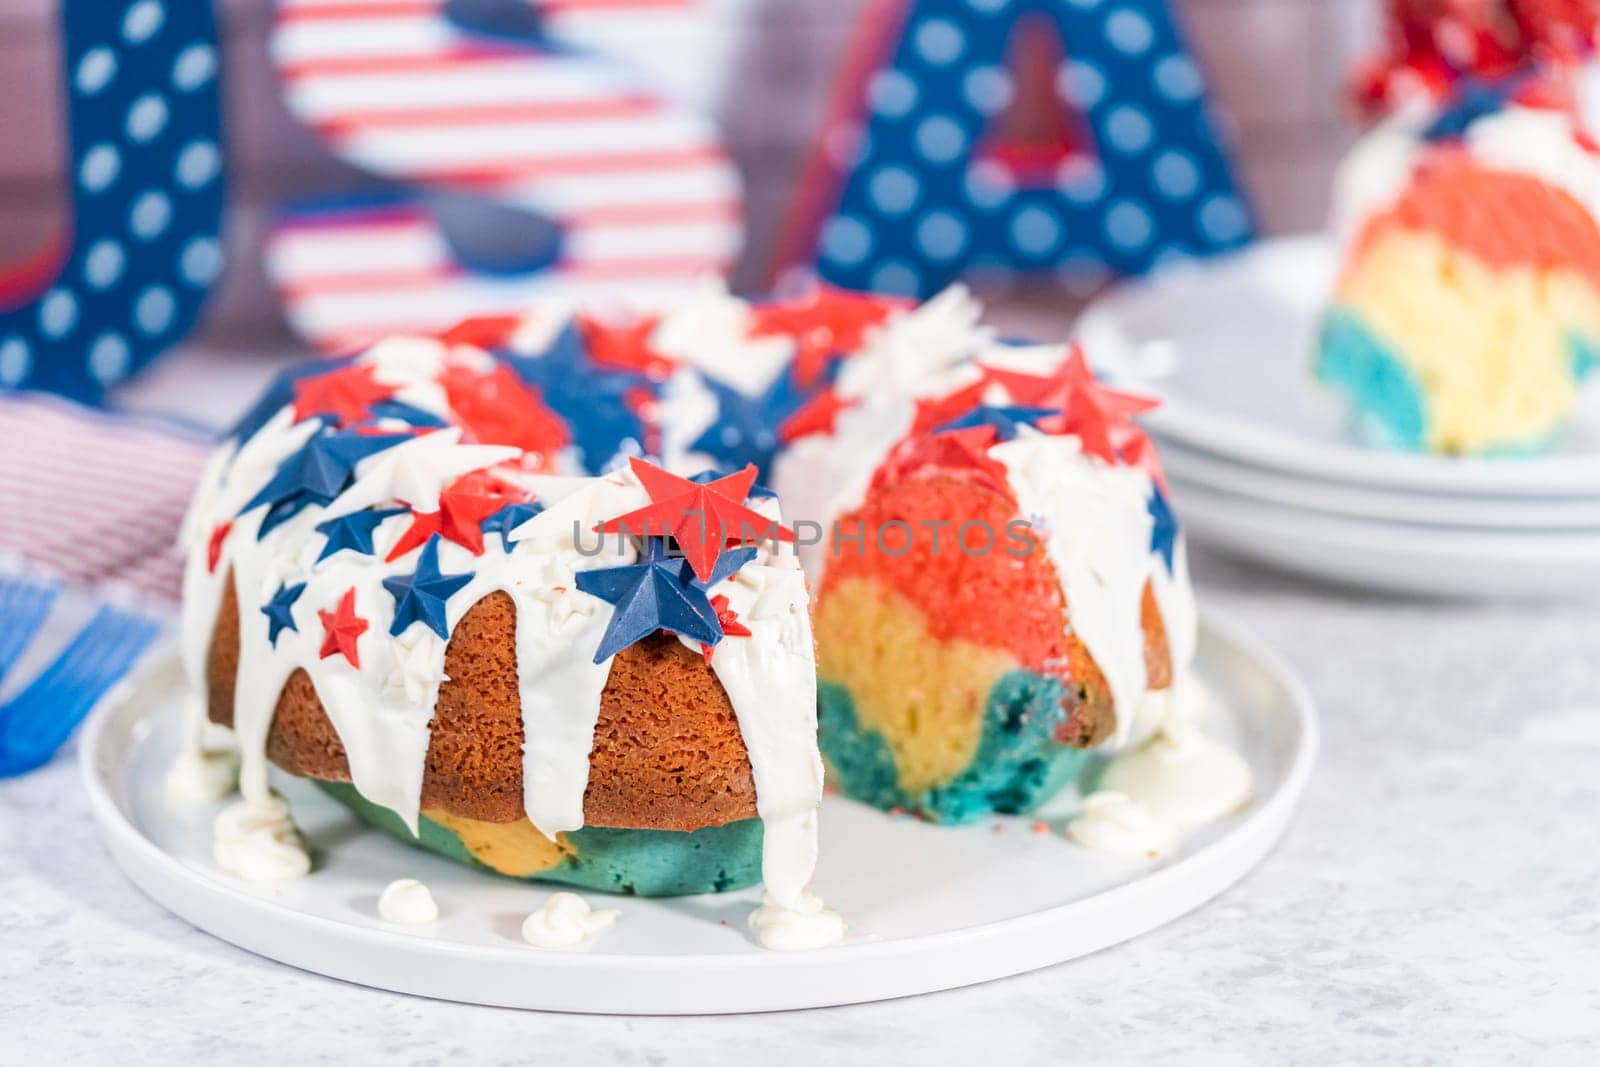 Slicing July 4th bundt cake covered with a vanilla glaze and decorated with chocolate stars.